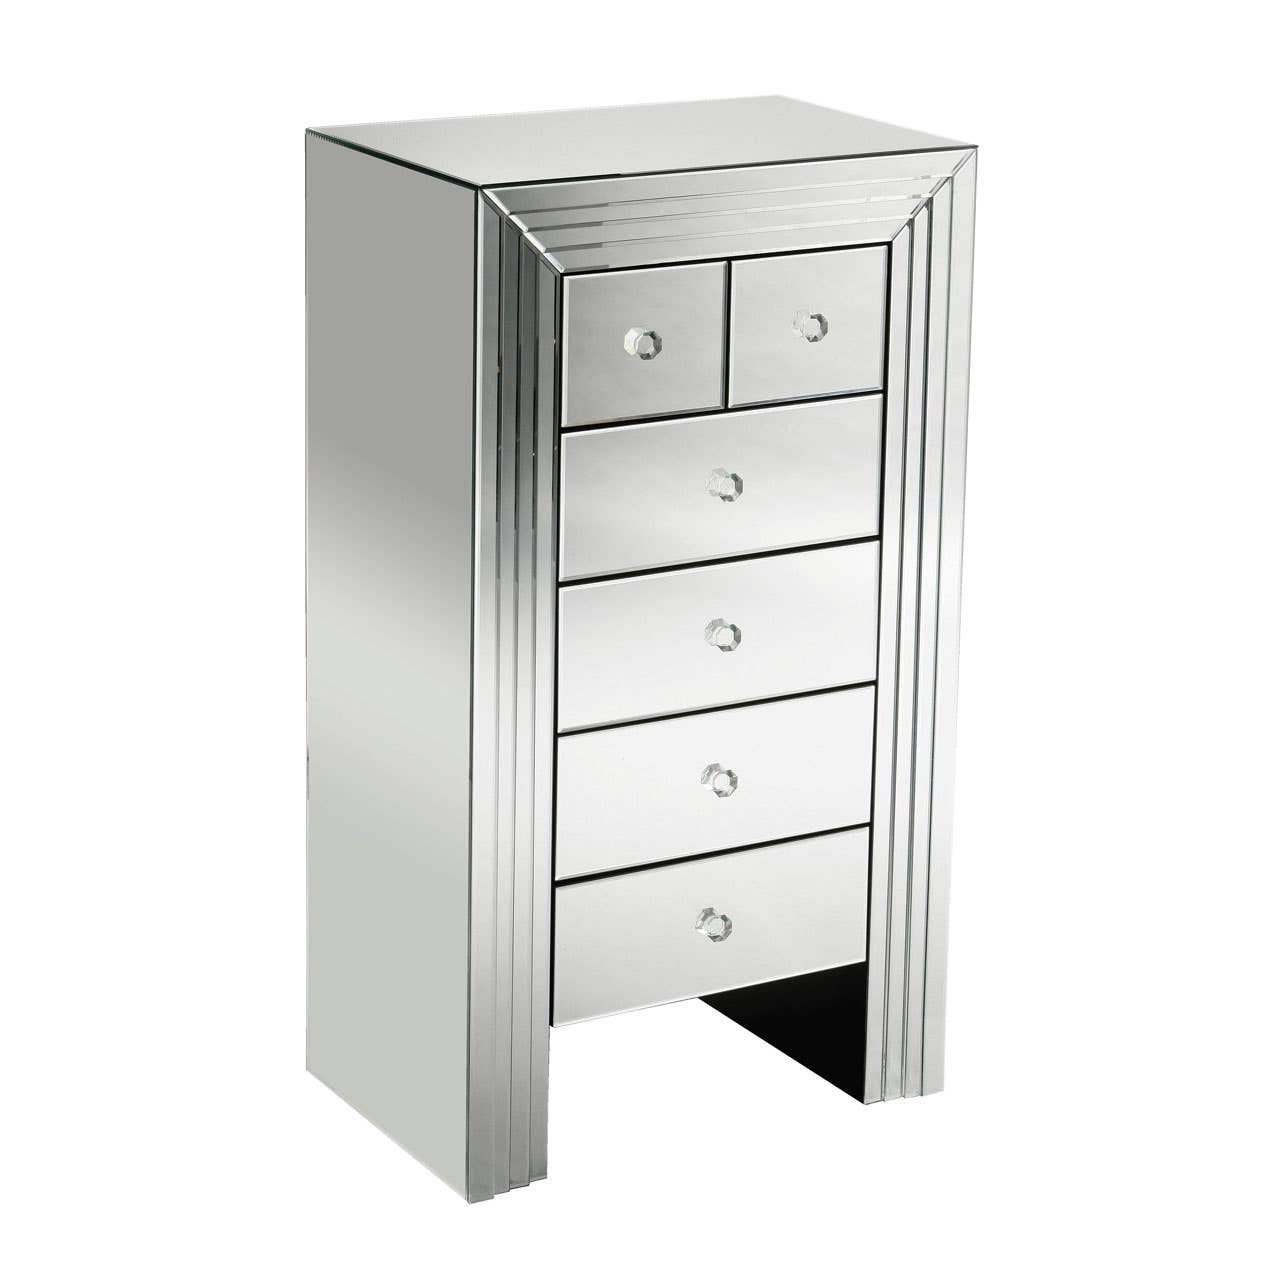 New Line Mirrored 6 Drawer Chest